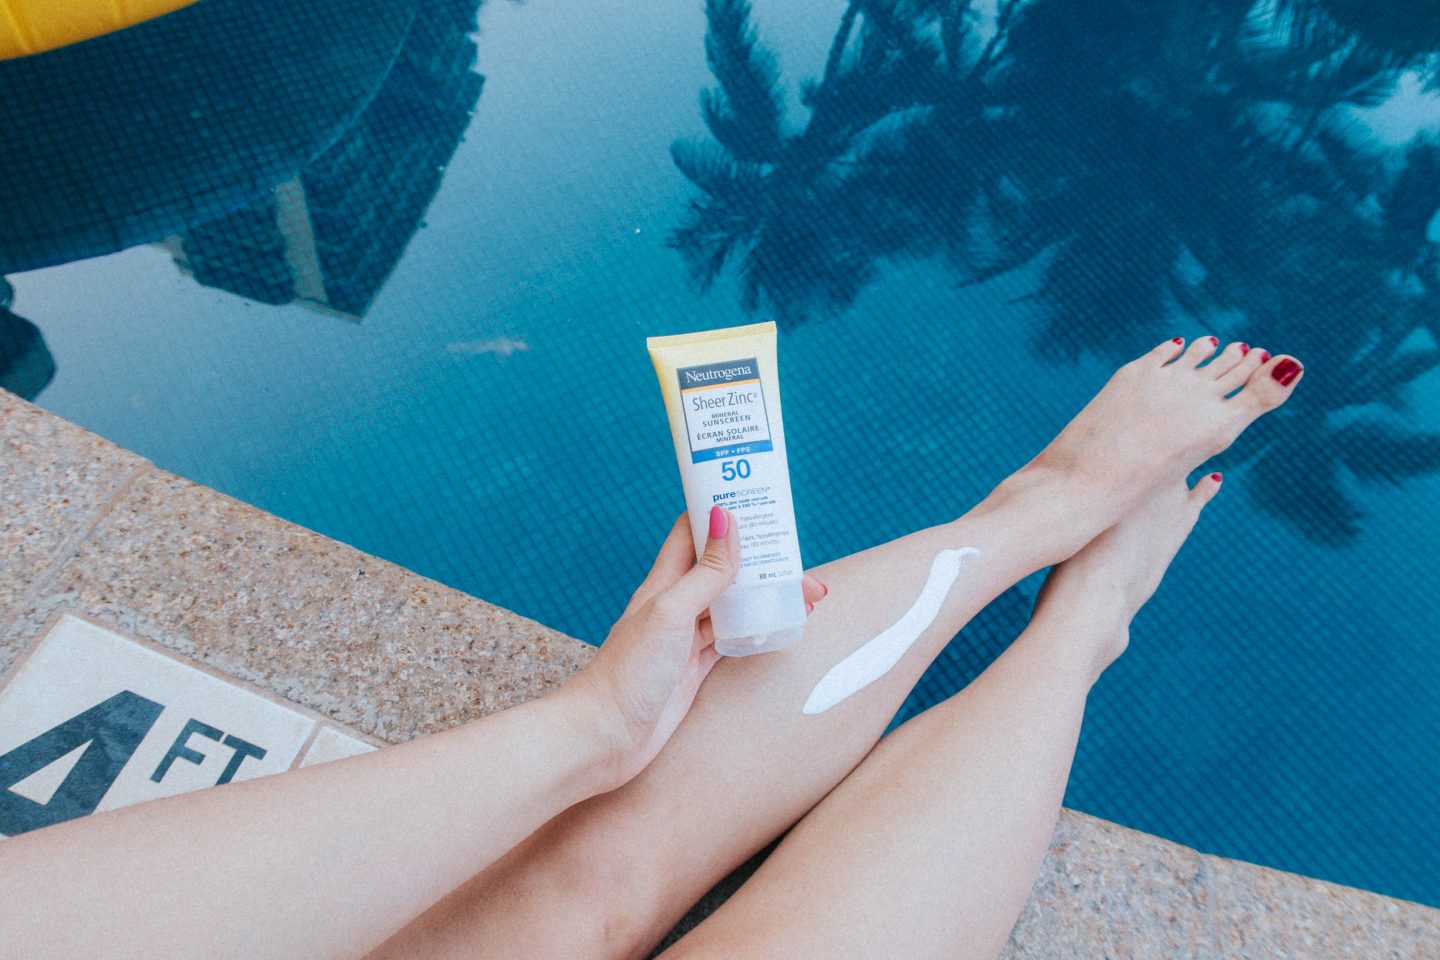 Using Neutrogena's Sheer Zinc Mineral Sunscreen poolside to protect my skin